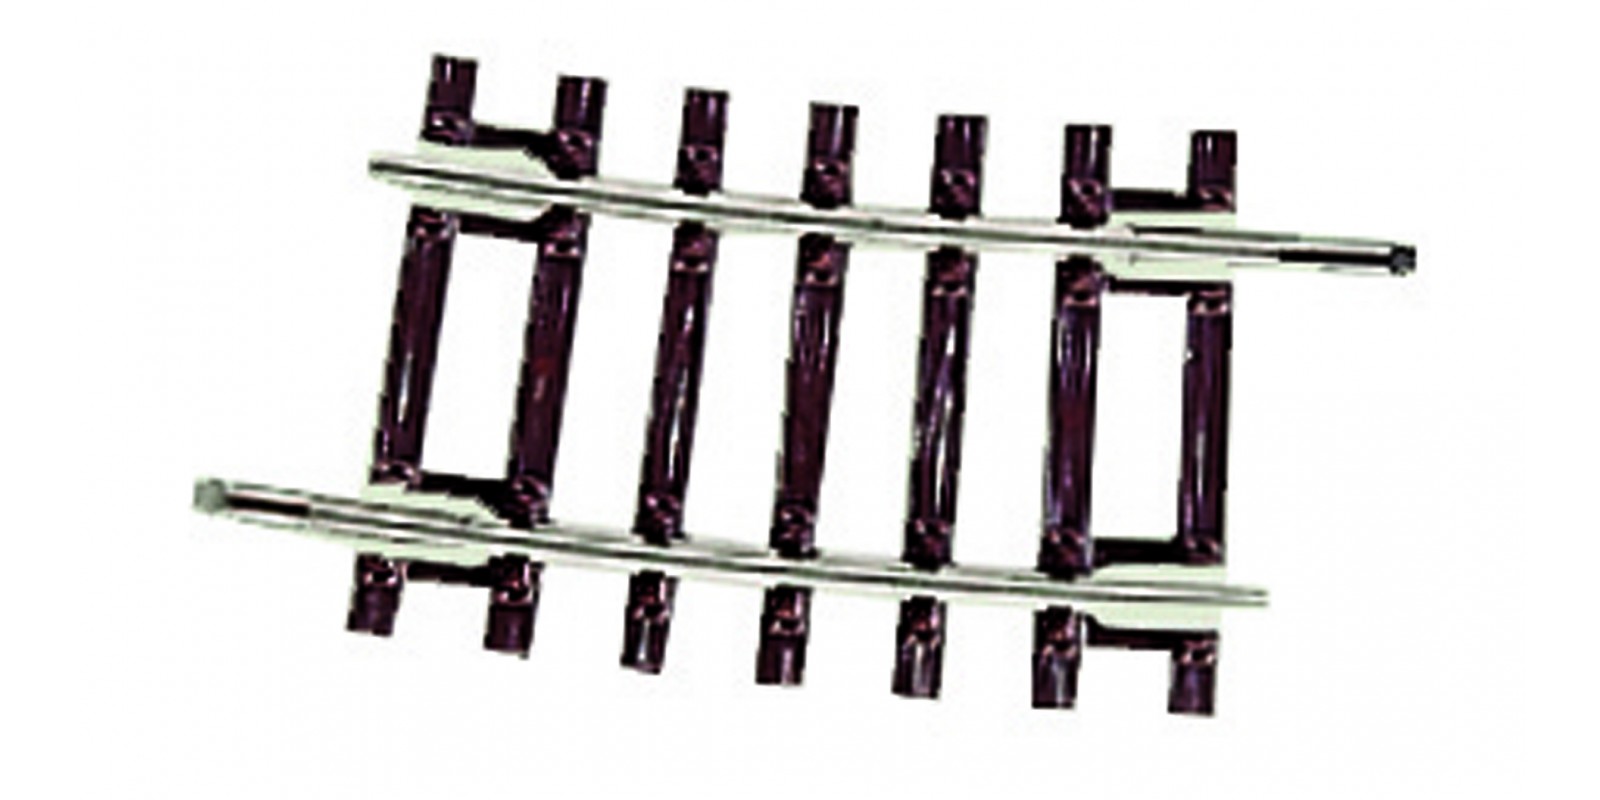 RO42408 - Curved track R2¼, 7.5°